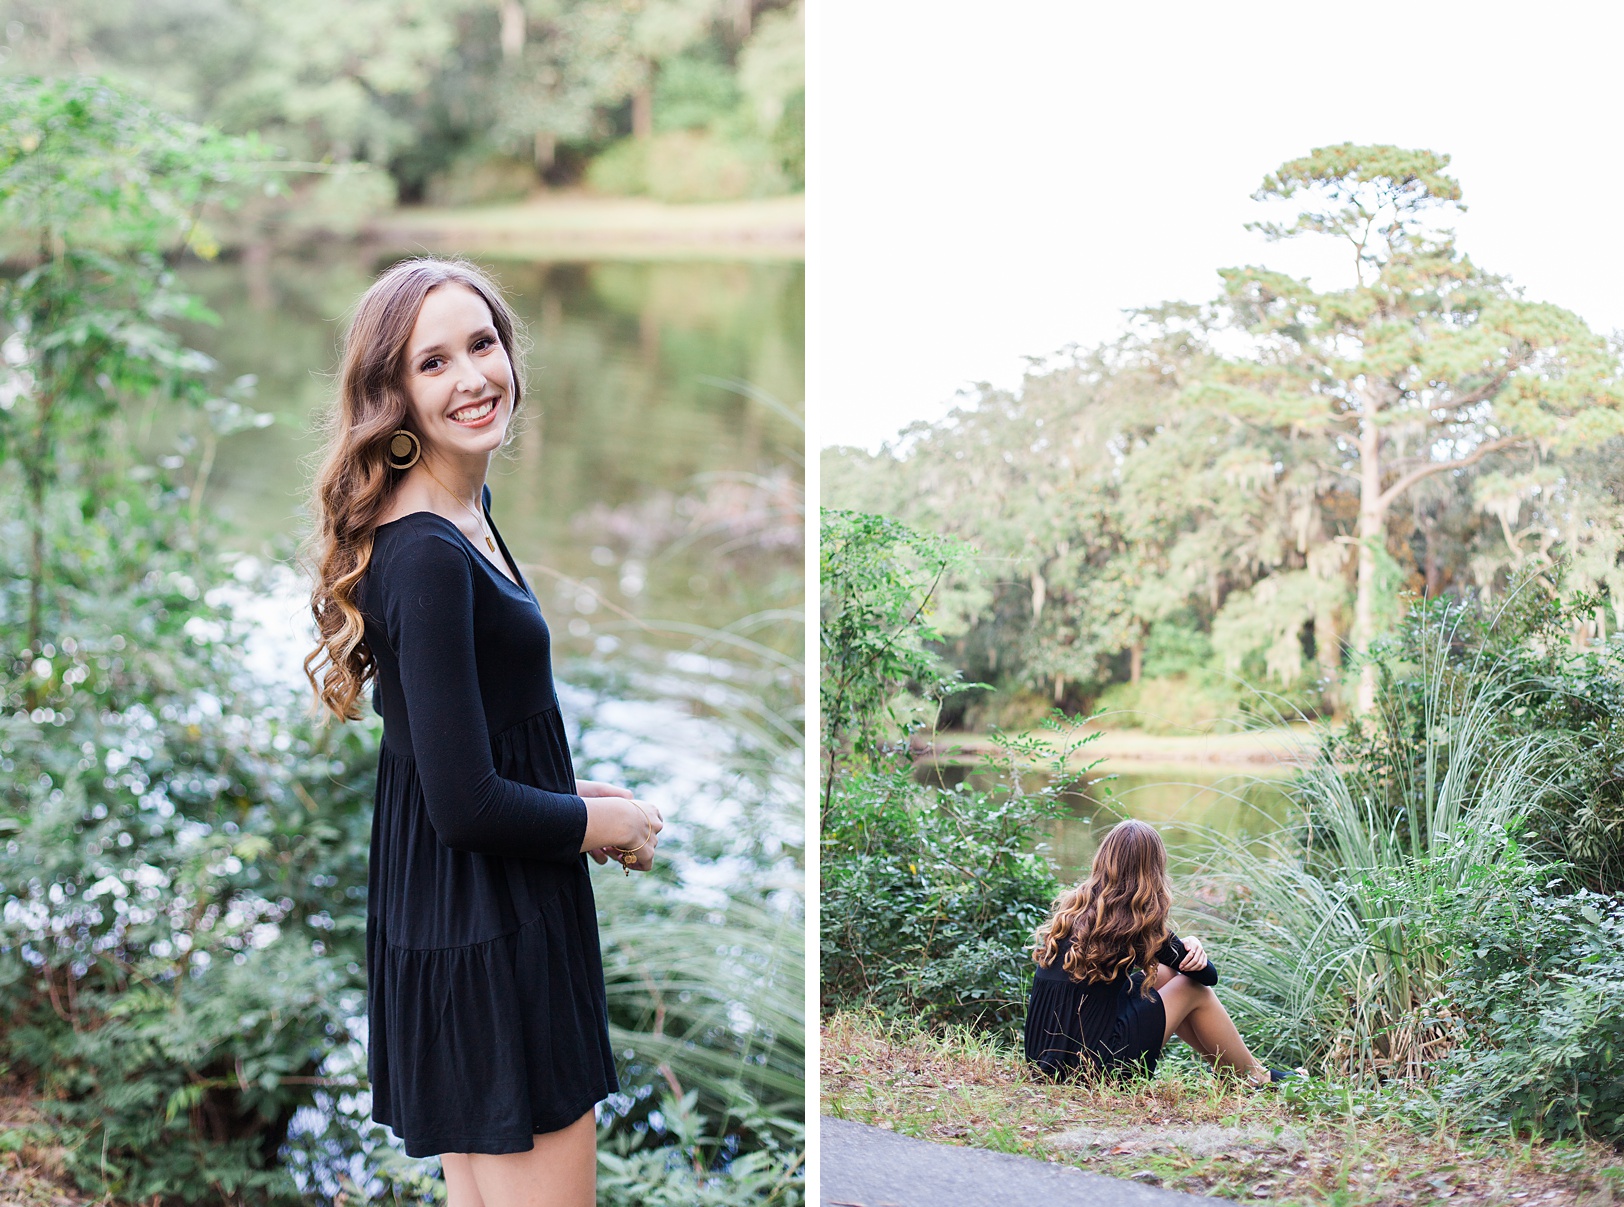 Outdoor Senior Pictures in South Carolina | Kaitlin Scott Photography